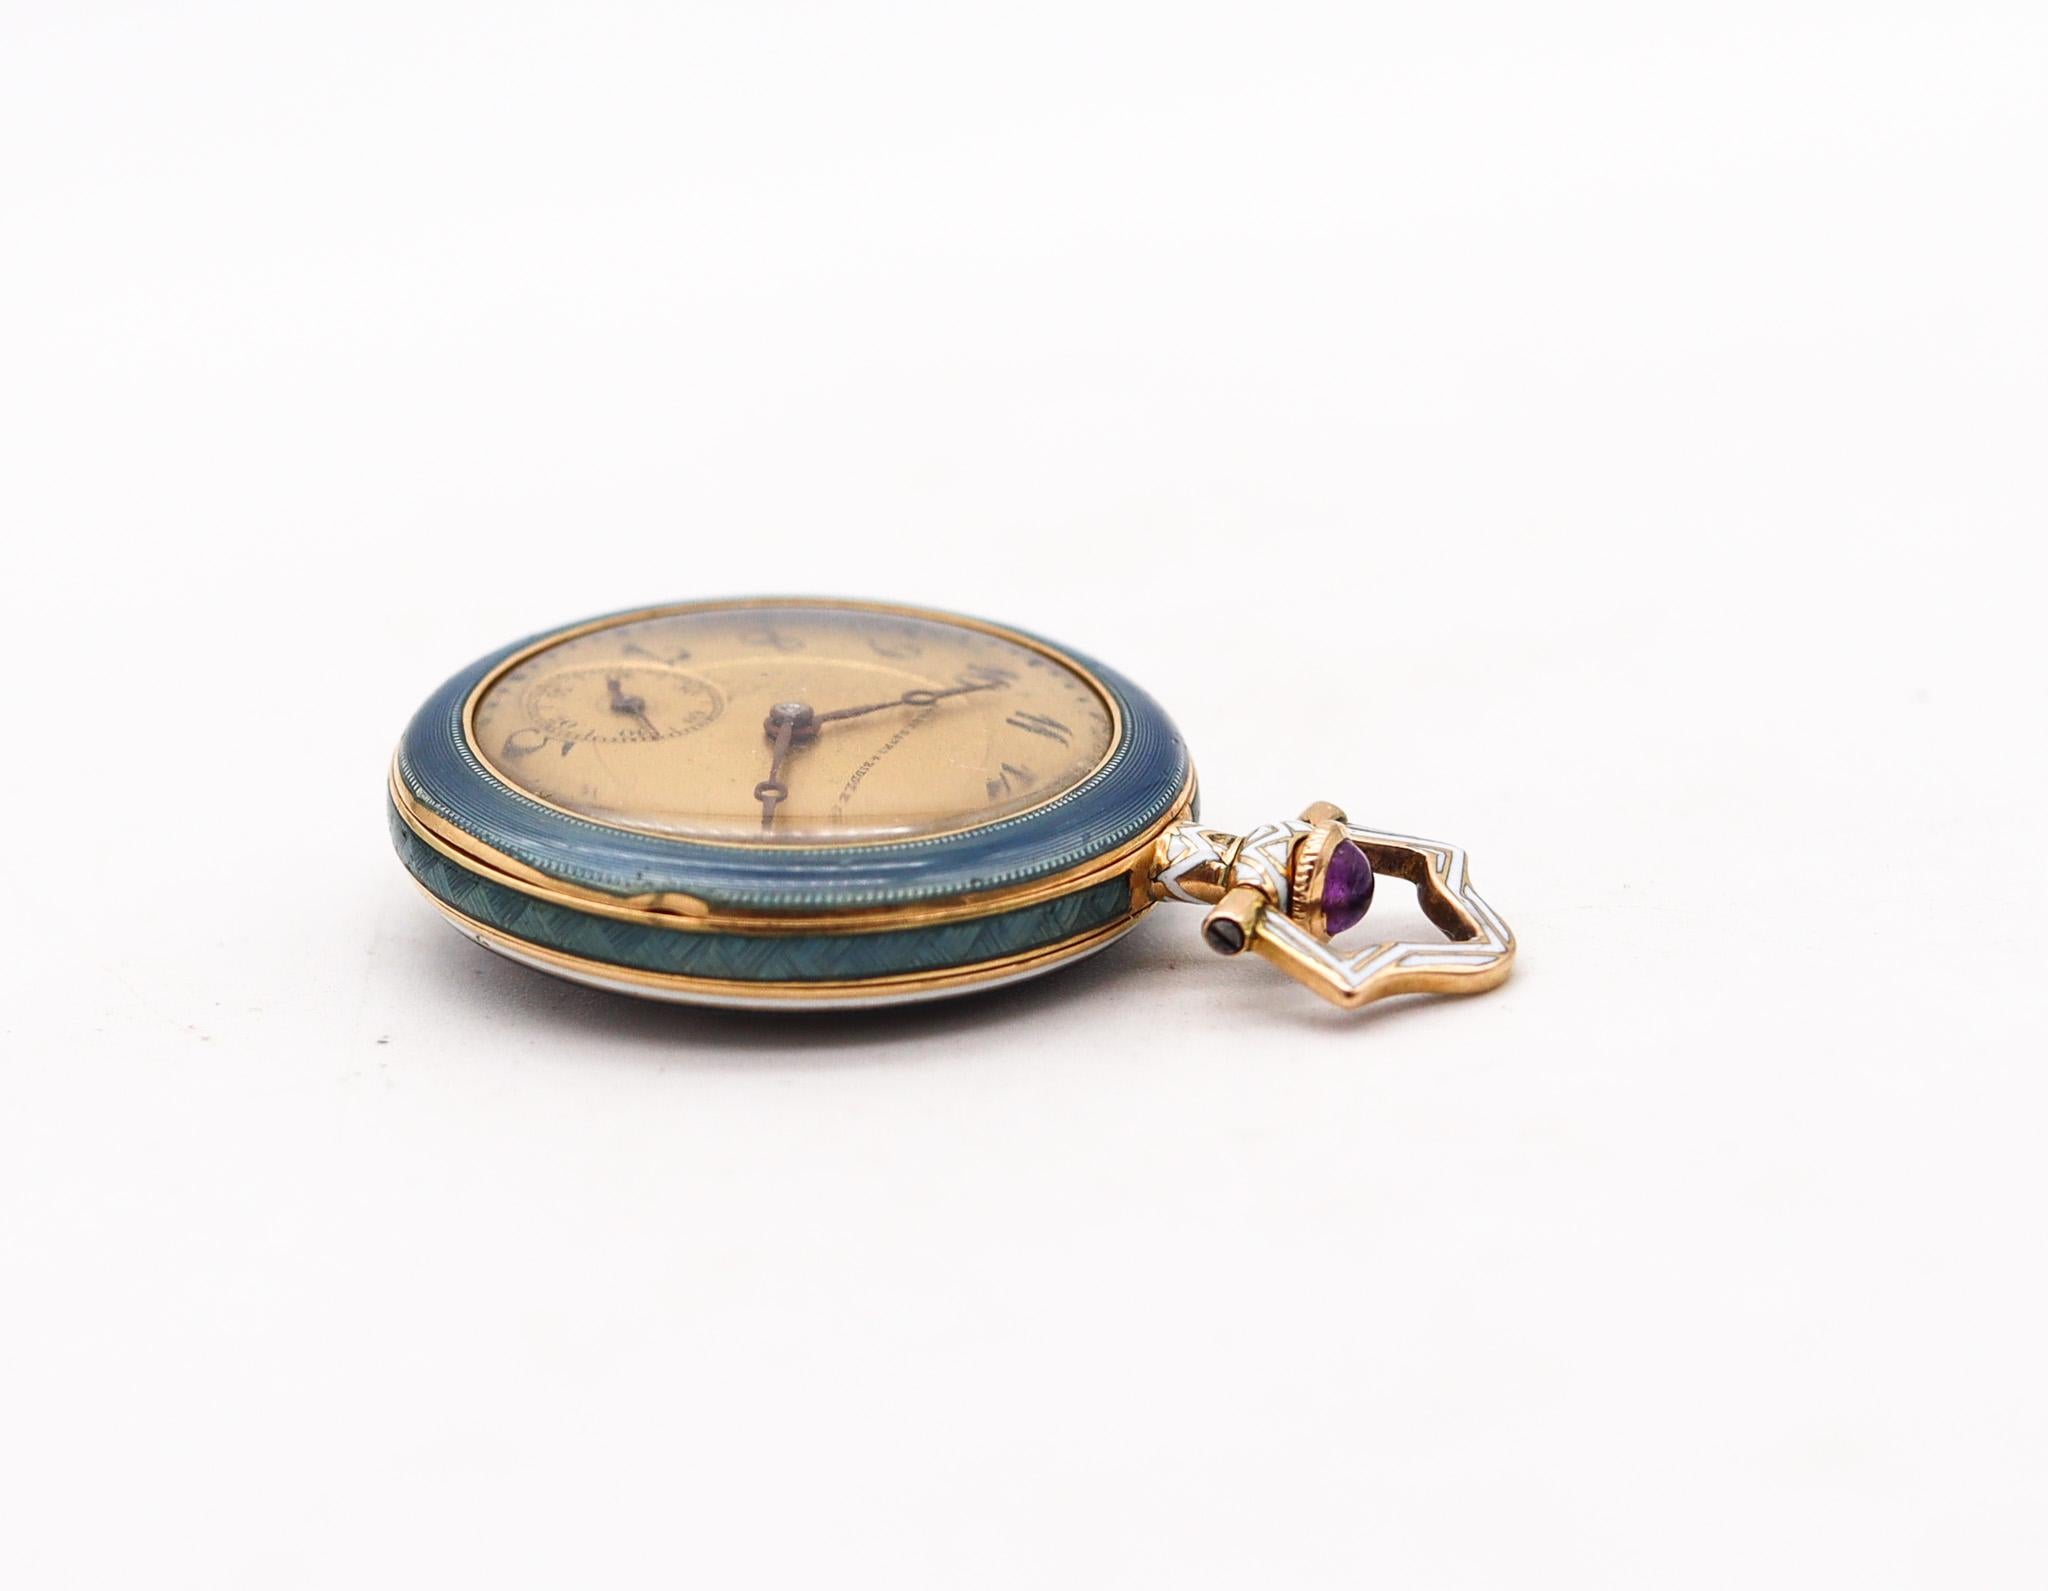 Bailey Banks & Biddle 1910 Edwardian Enamel Watch In 14Kt Gold With Diamonds In Excellent Condition For Sale In Miami, FL